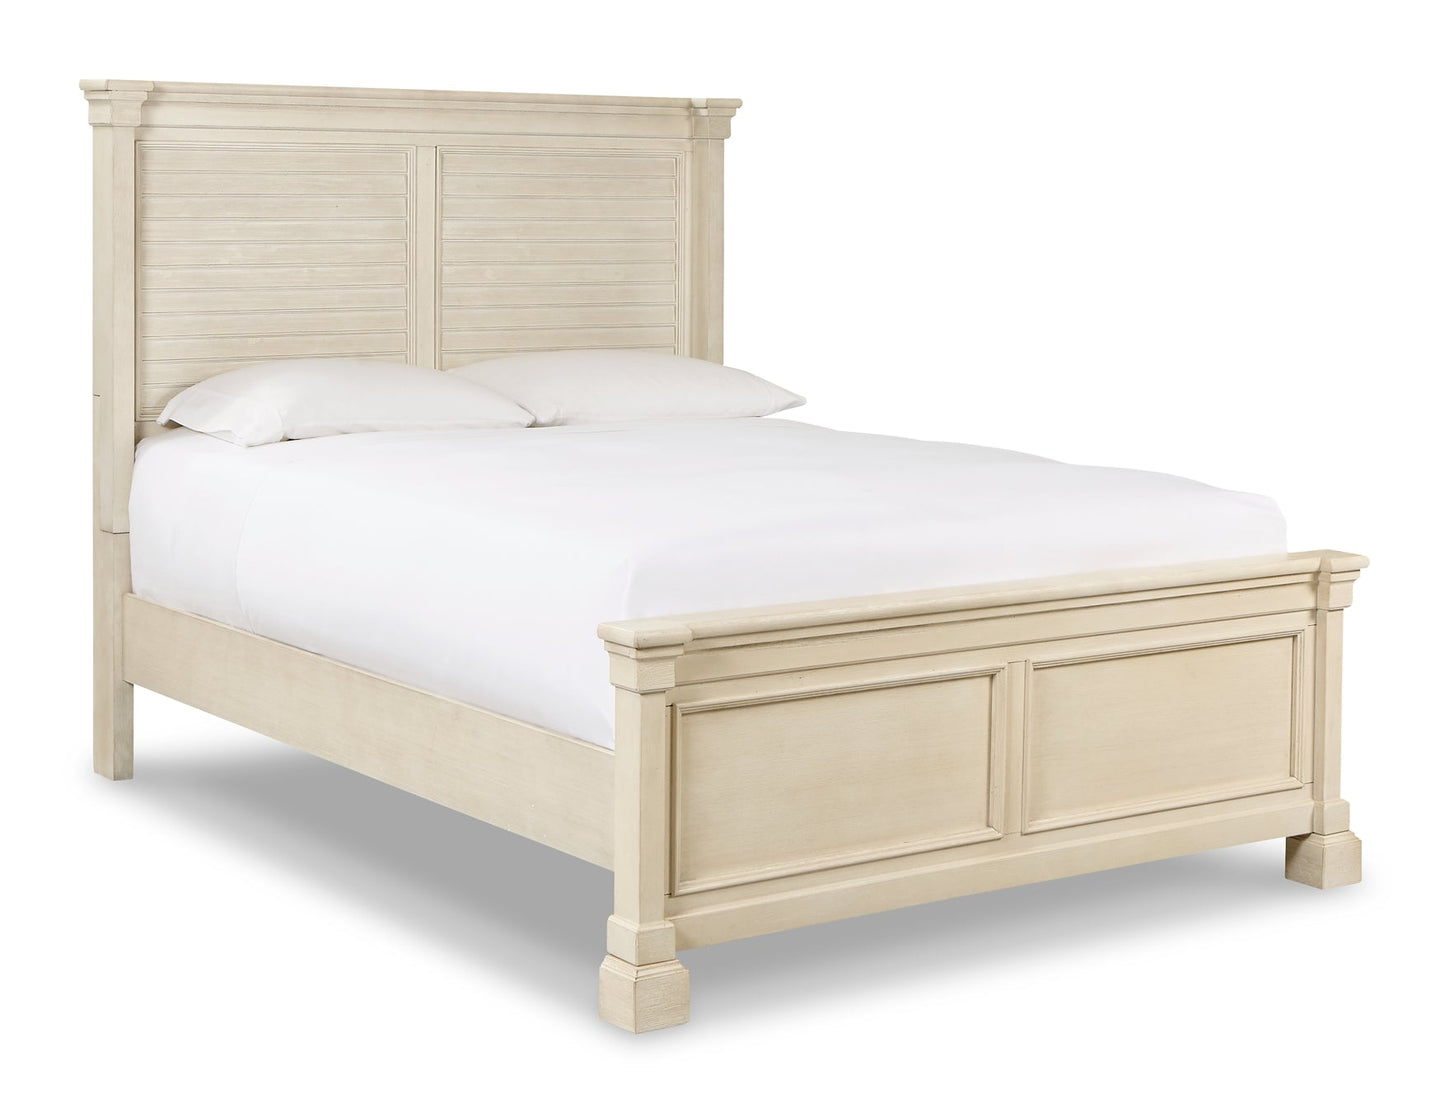 Bolanburg Queen Panel Bed with Dresser at Walker Mattress and Furniture Locations in Cedar Park and Belton TX.